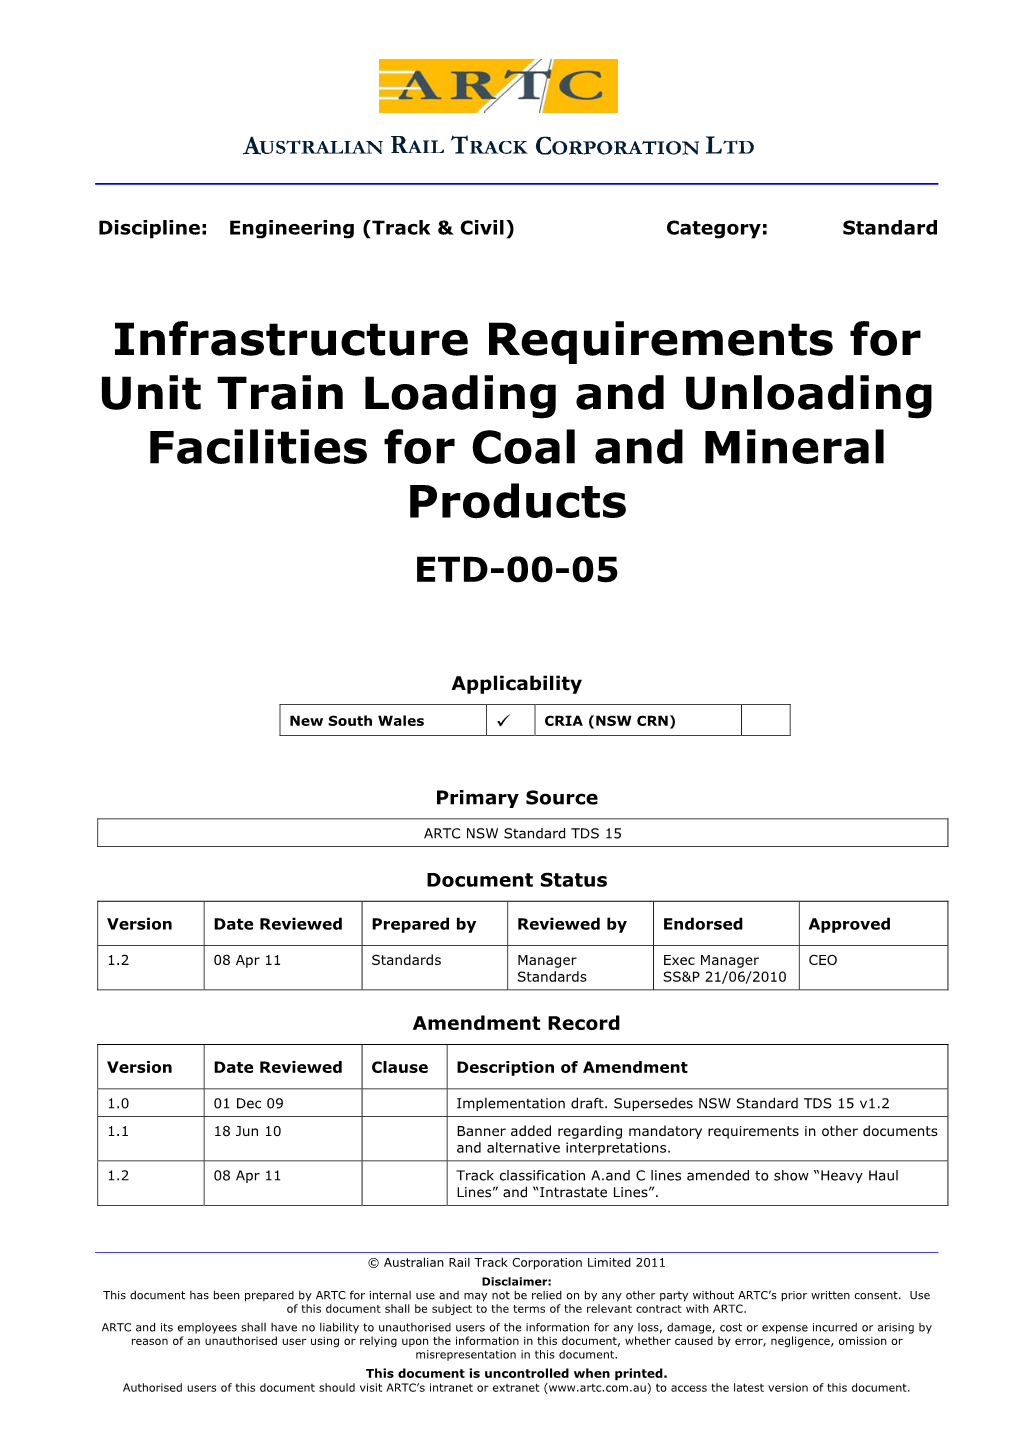 Infrastructure Requirements for Unit Train Loading and Unloading Facilities for Coal and Mineral Products ETD-00-05